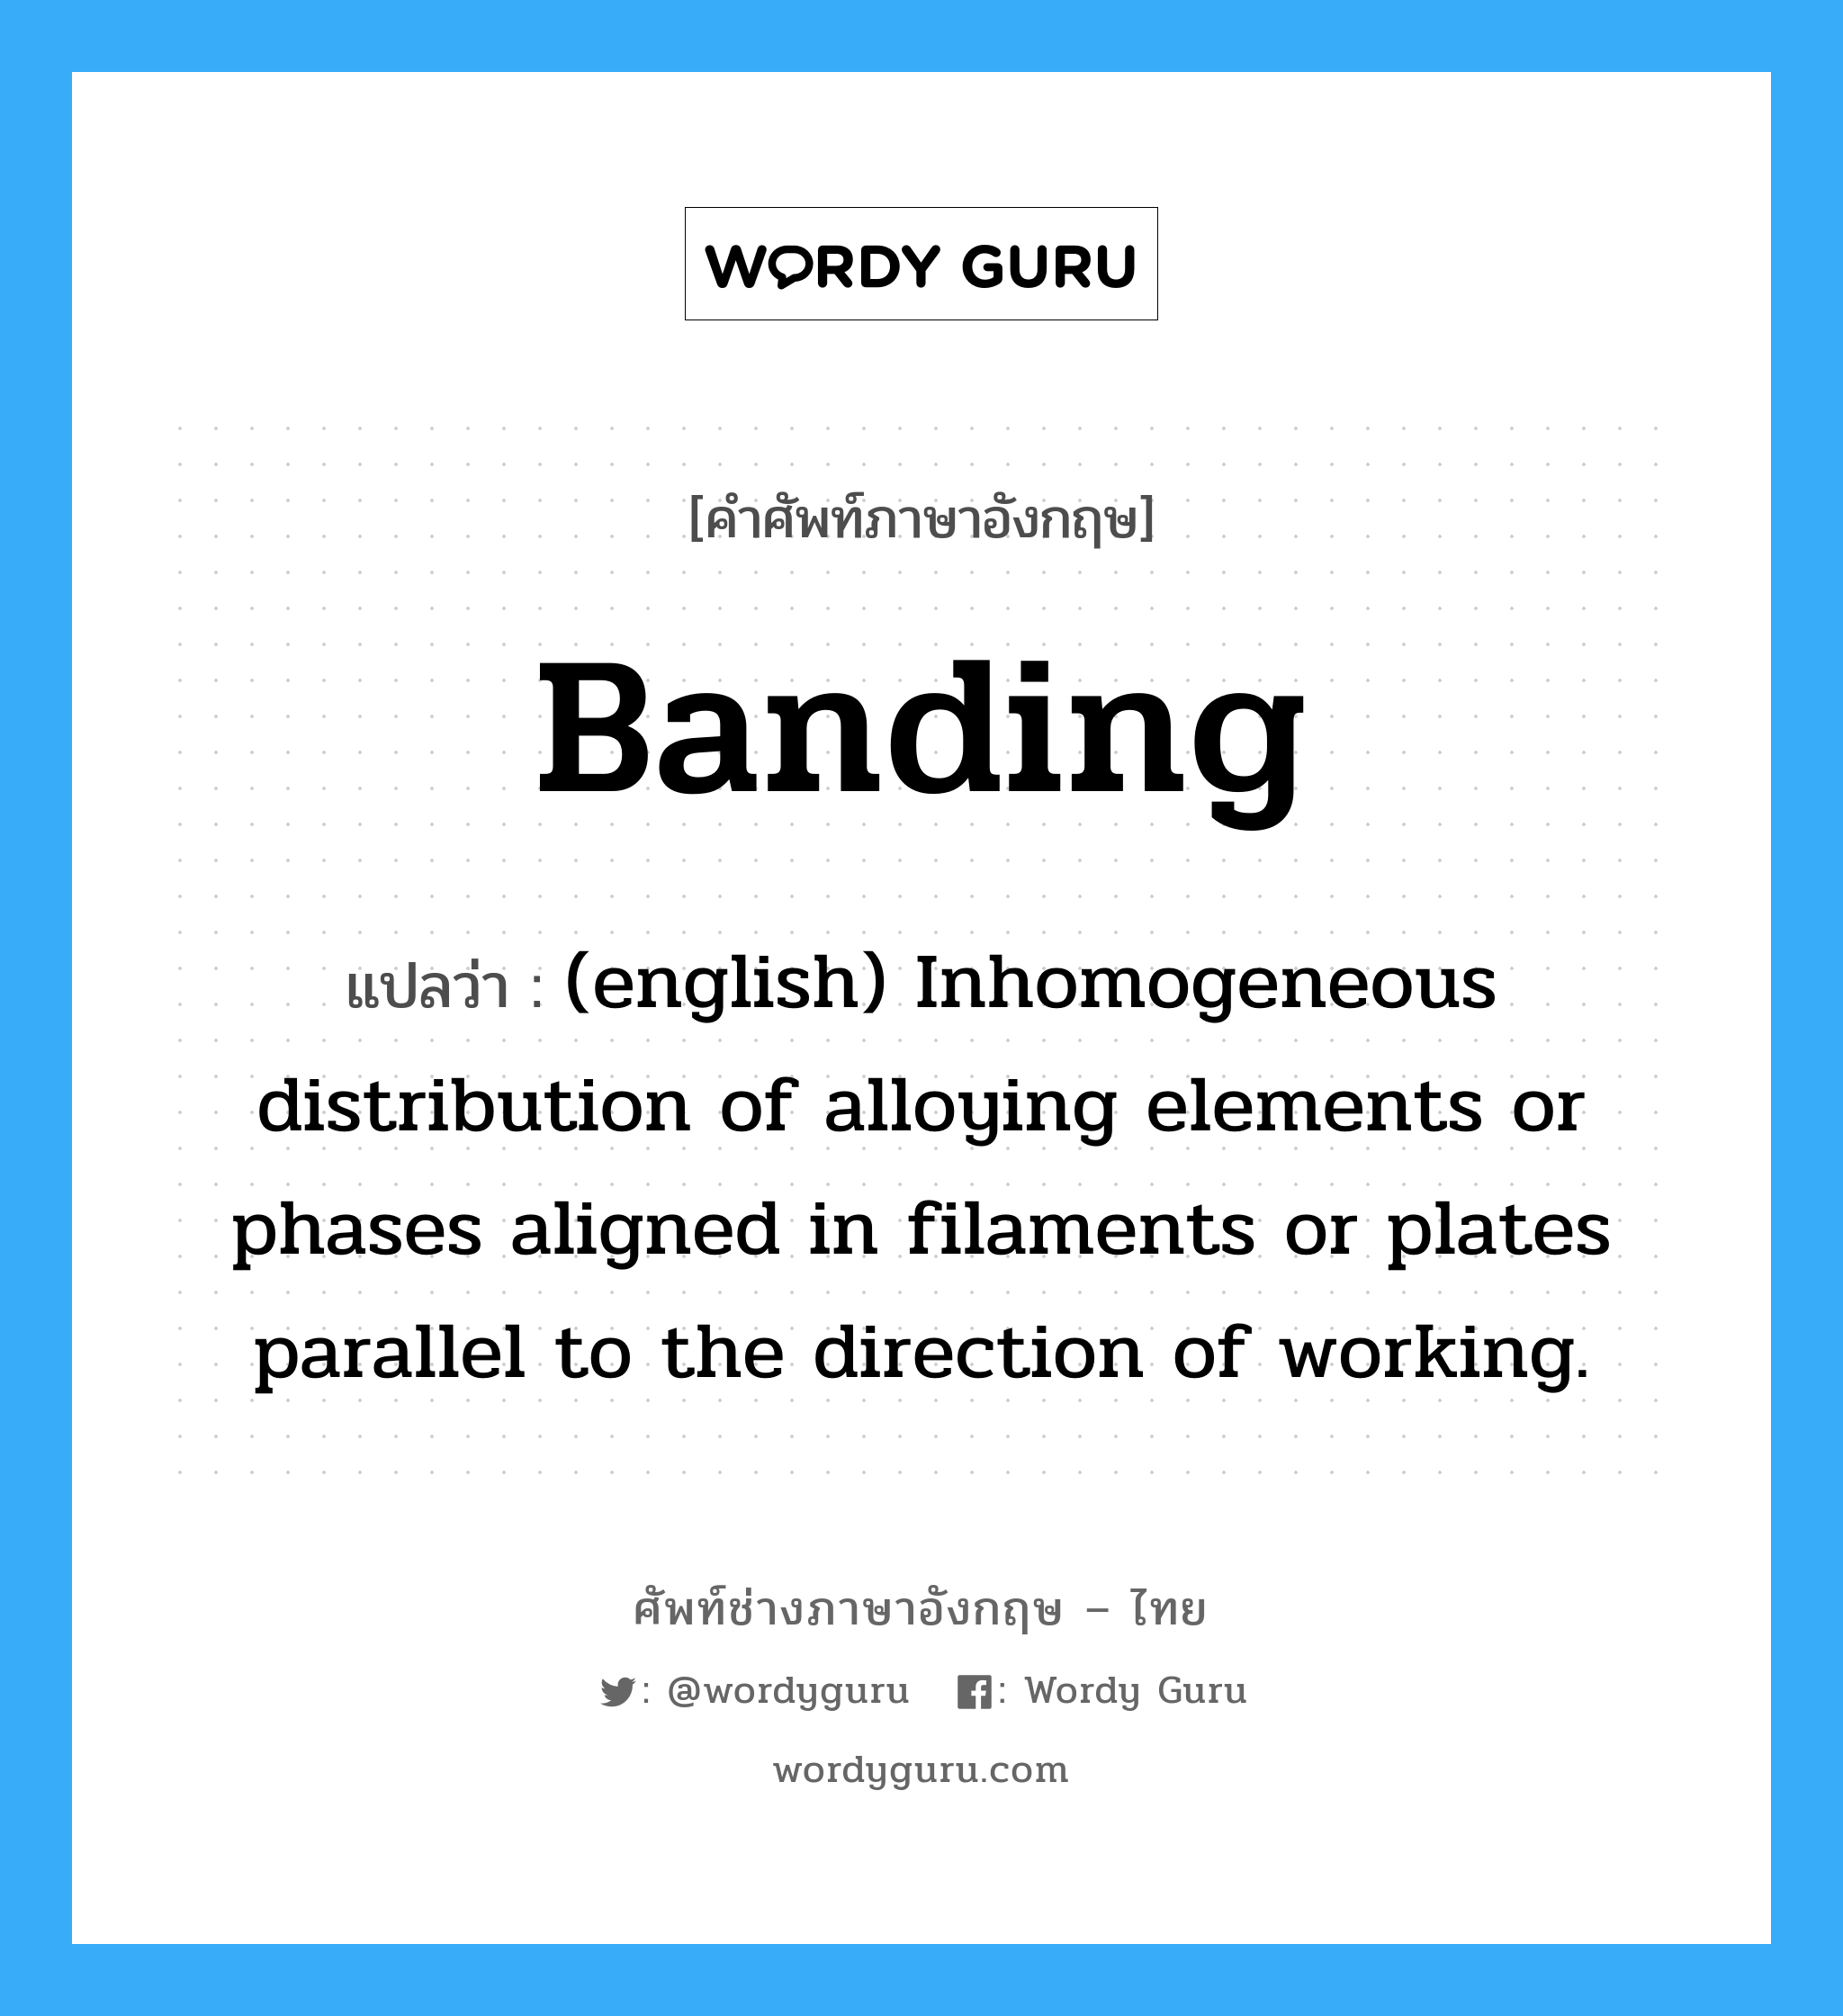 Banding แปลว่า?, คำศัพท์ช่างภาษาอังกฤษ - ไทย Banding คำศัพท์ภาษาอังกฤษ Banding แปลว่า (english) Inhomogeneous distribution of alloying elements or phases aligned in filaments or plates parallel to the direction of working.